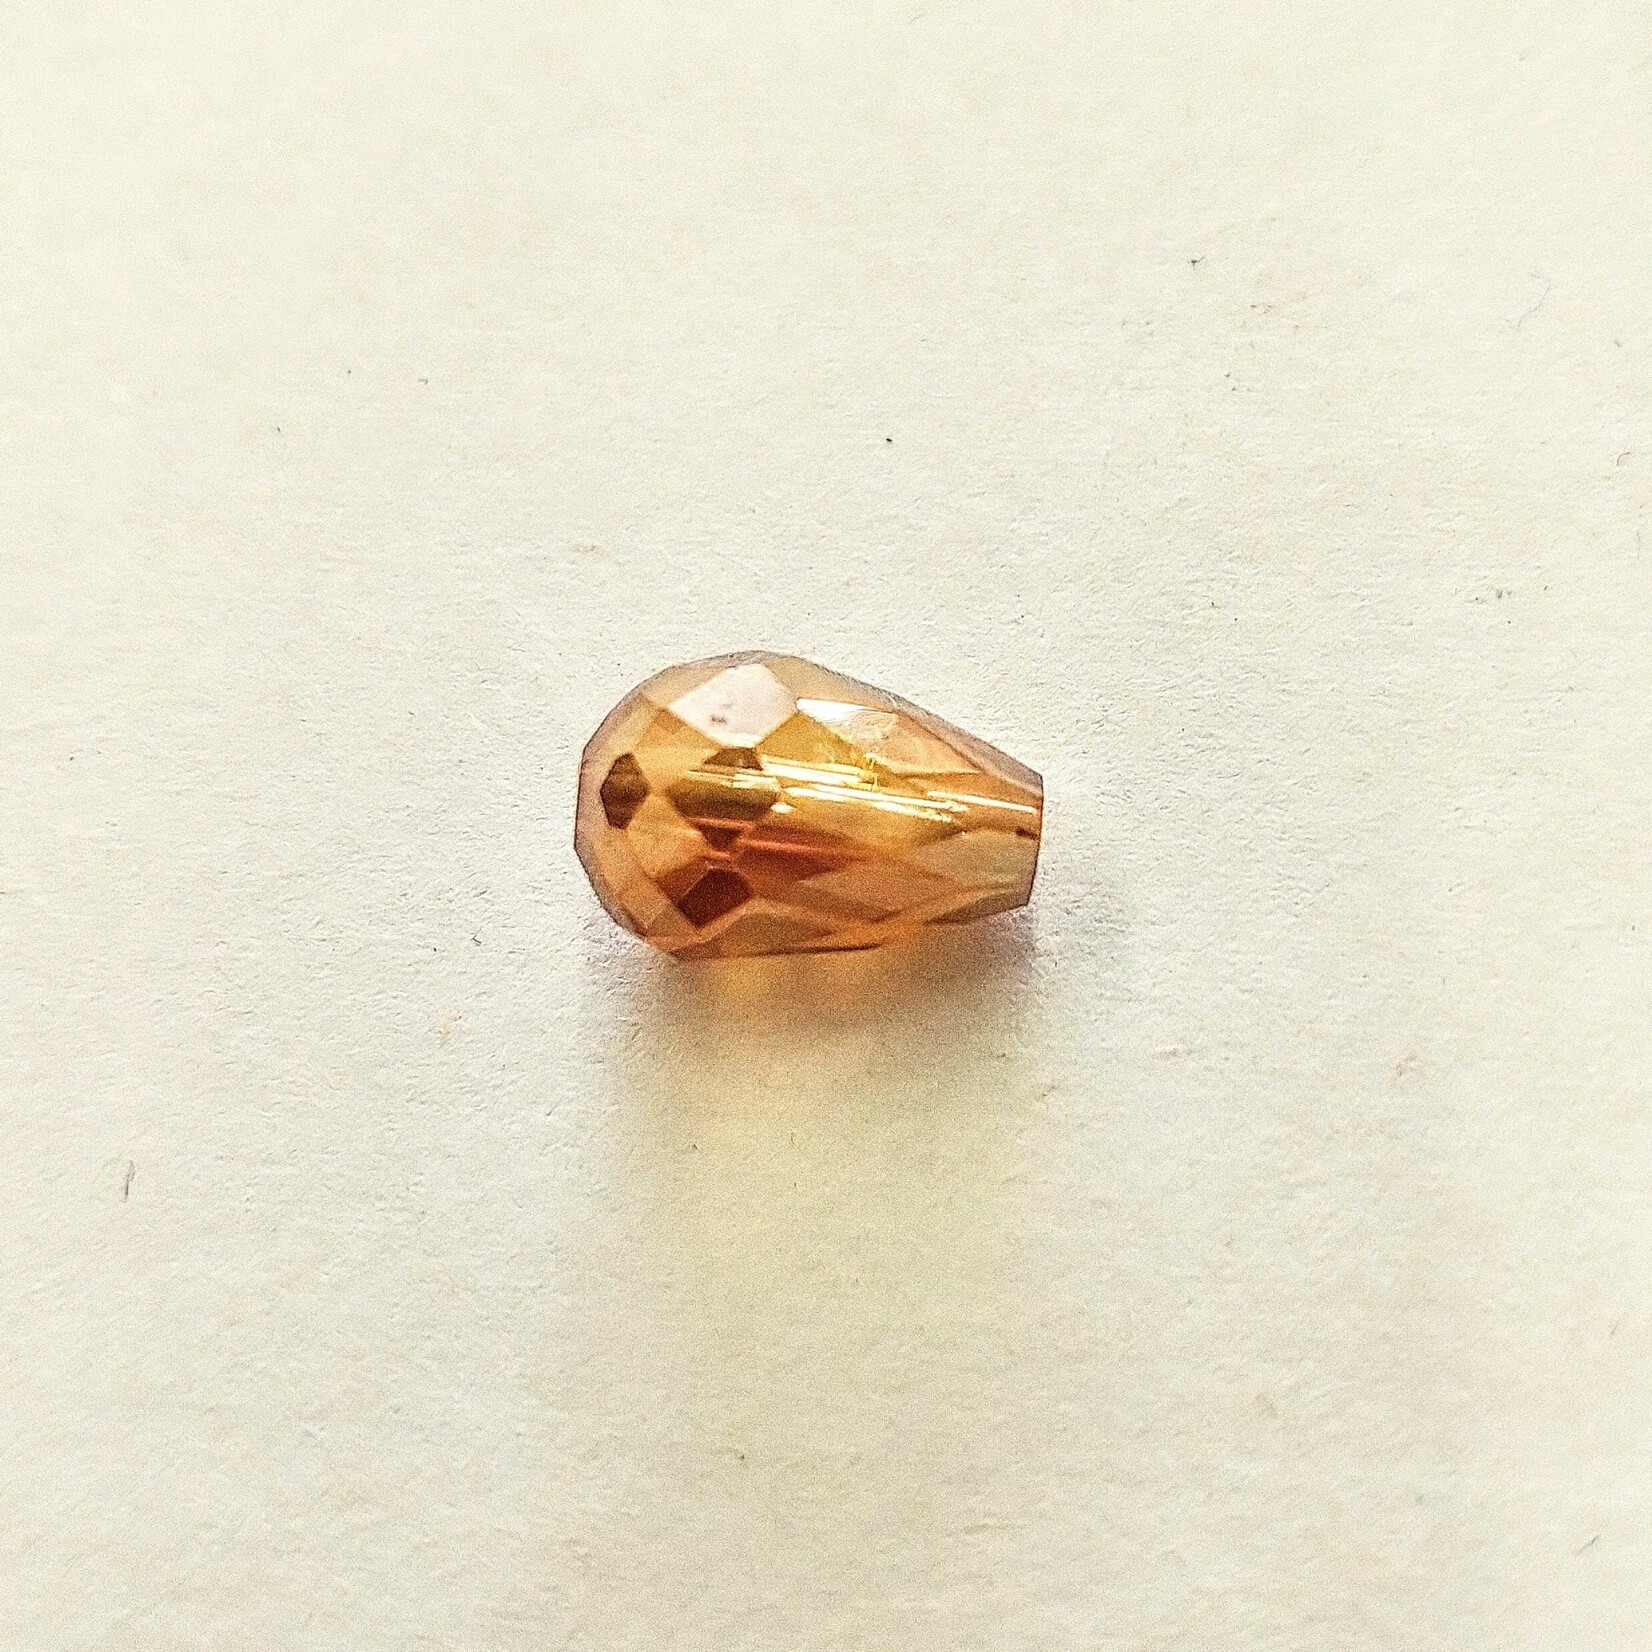 Faceted Crystal Teardrop 12x8mm Copper Bead